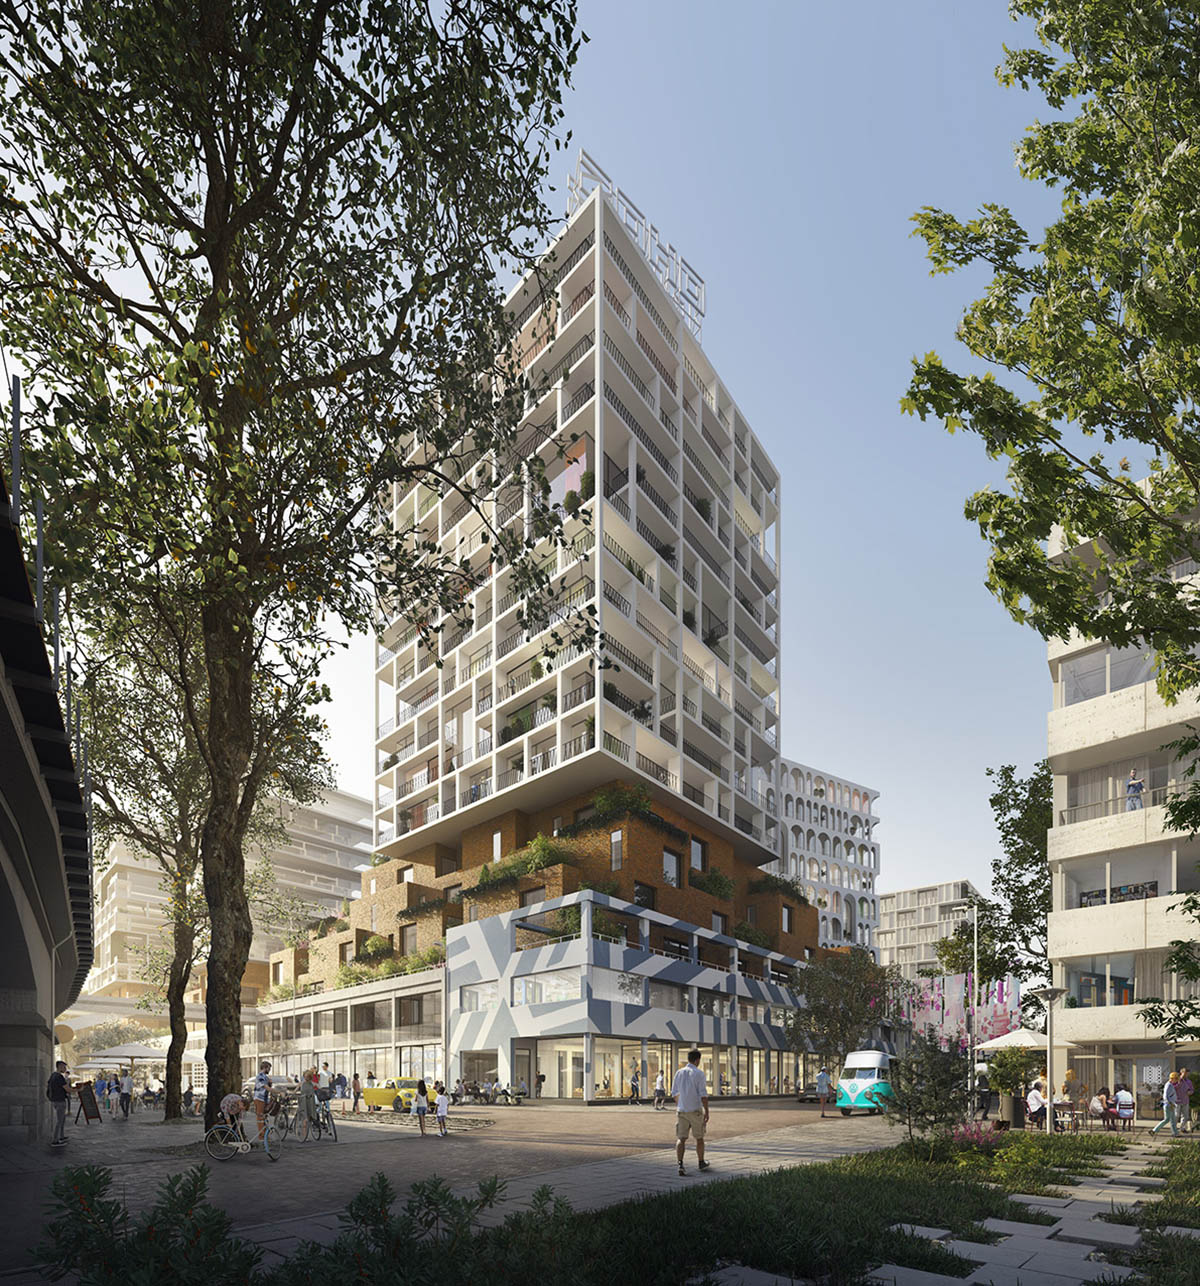 barricade De gasten baard Team of Rotterdam based architects selected to design new ZoHo creative  district in Rotterdam